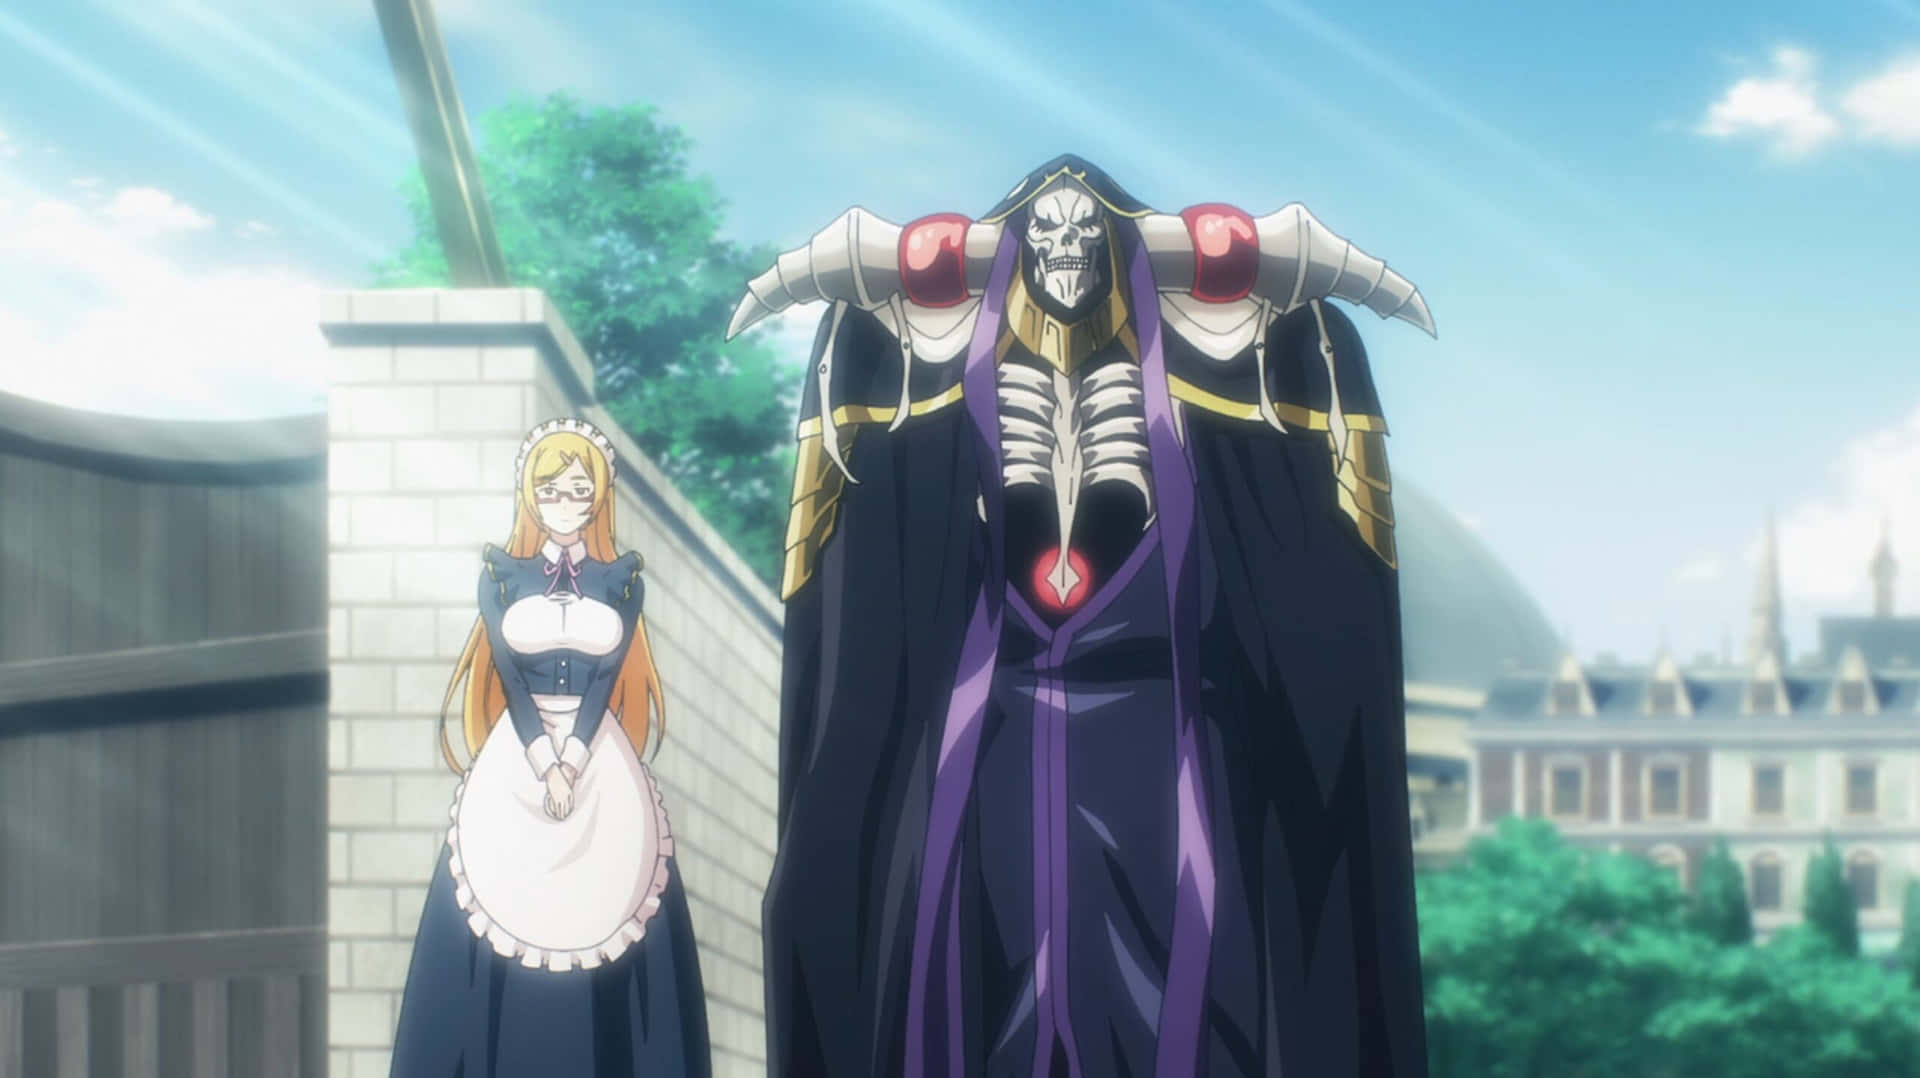 Imágenesde Overlord Ainz Ooal Gown Y Cixous.